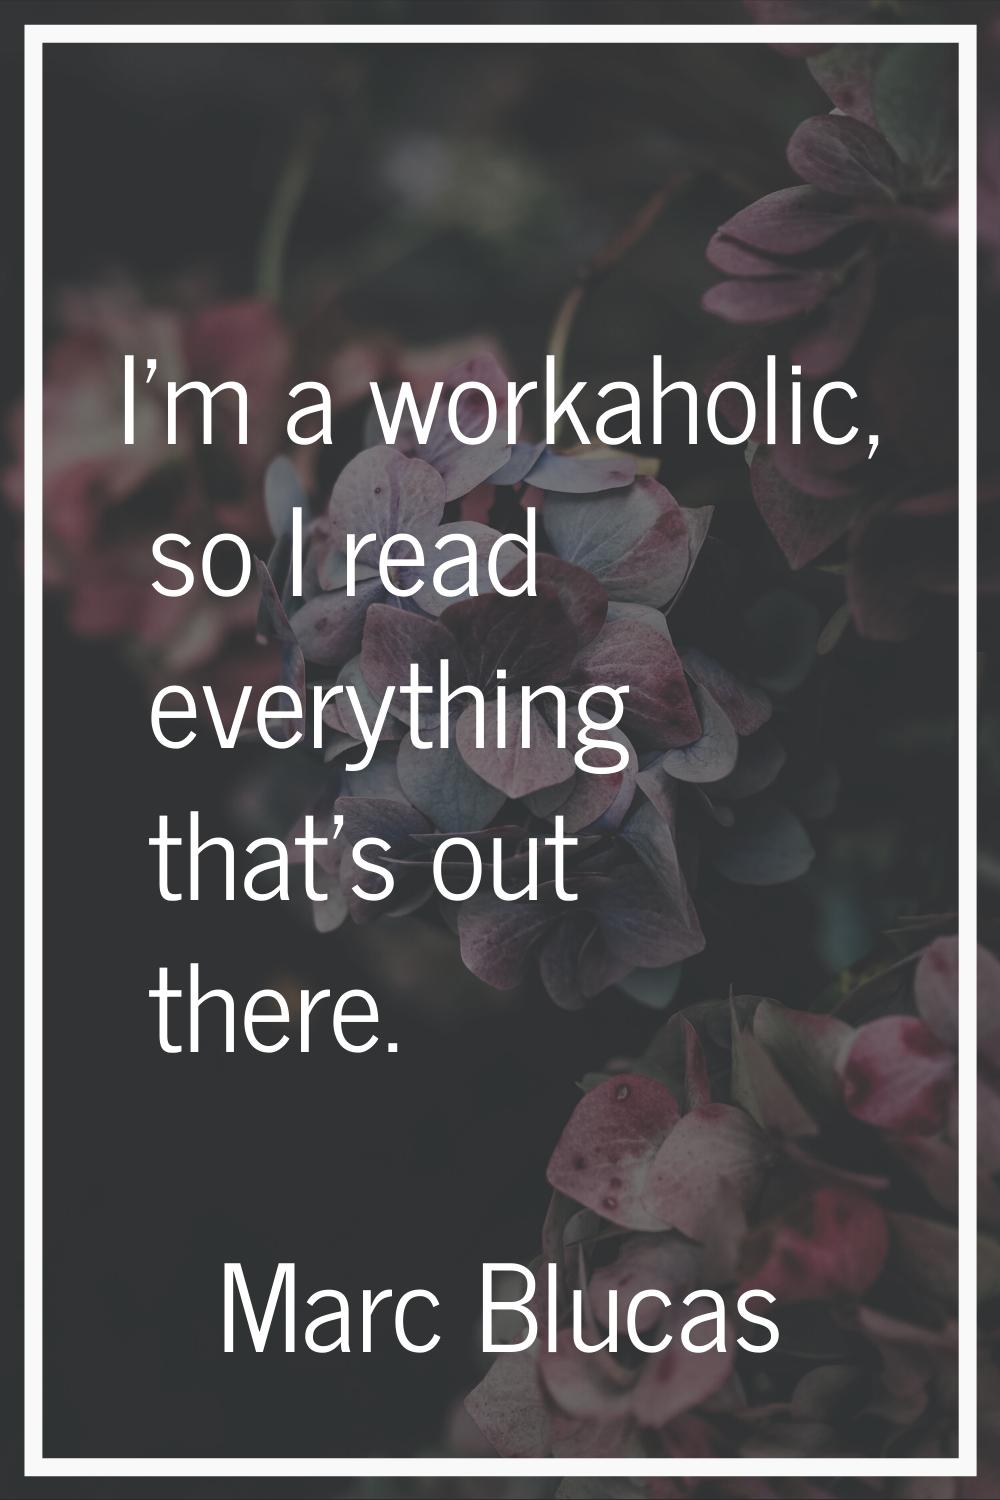 I'm a workaholic, so I read everything that's out there.